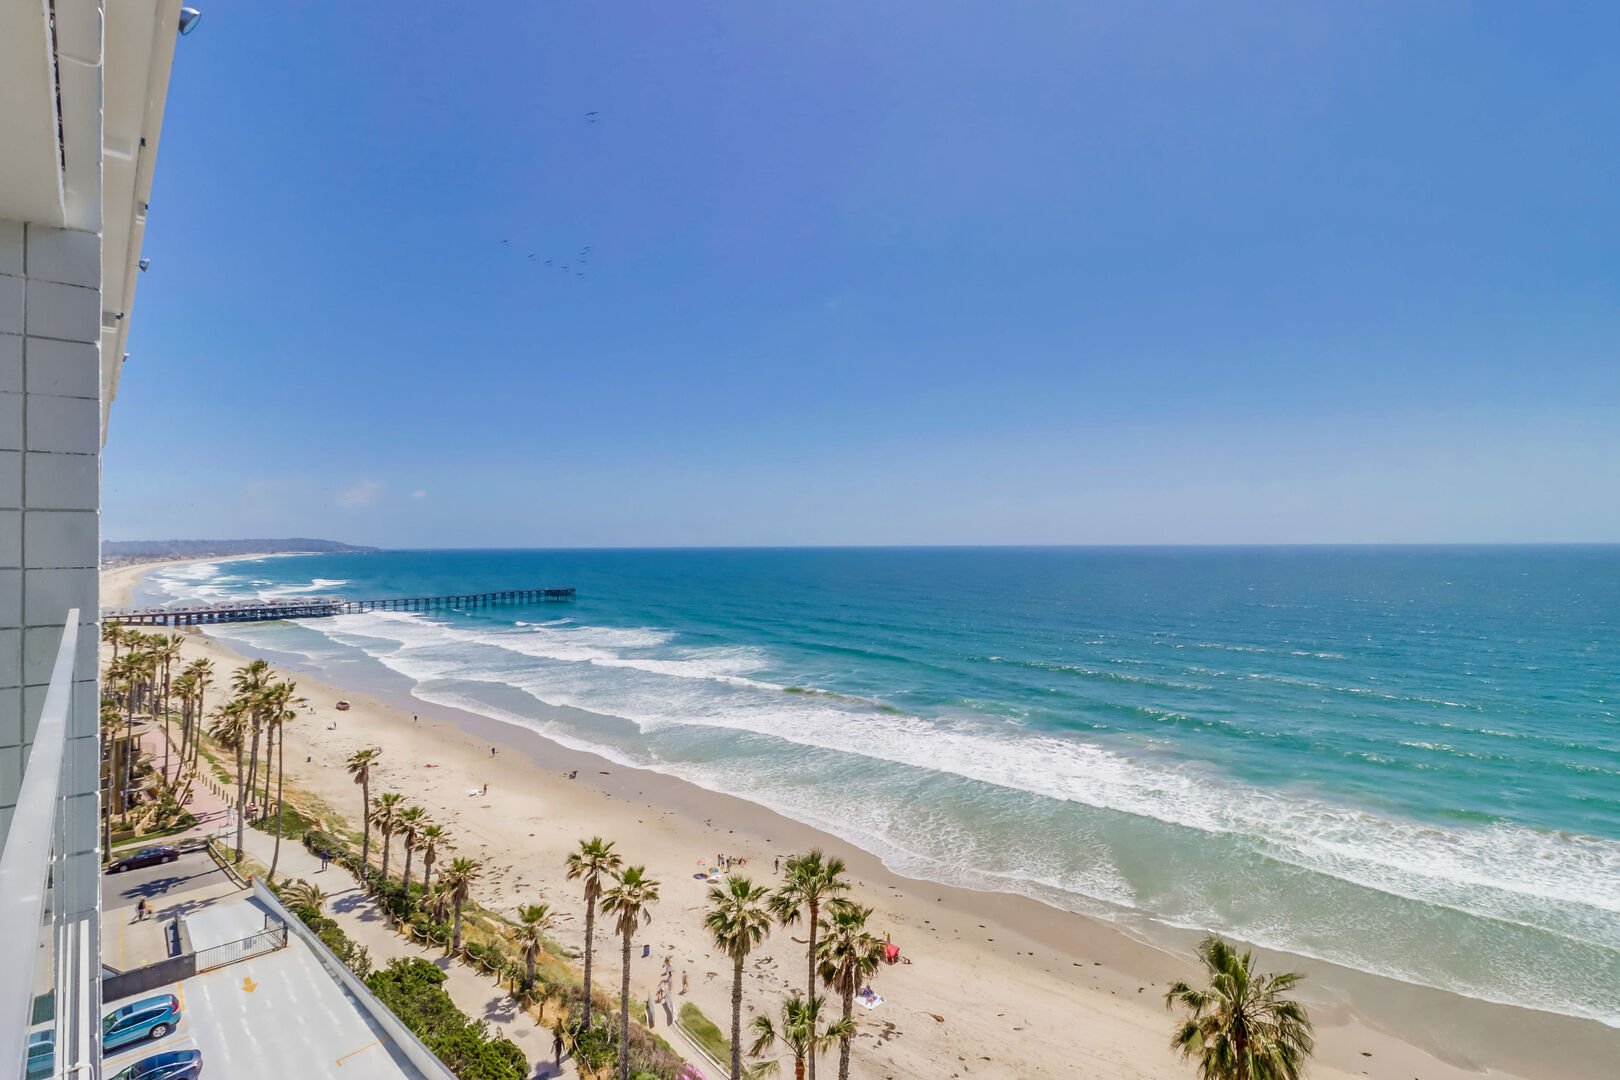 Enjoy the views of the rolling waves, active surfers, bikers and runners along the boardwalk, and beach goers right from the 9th floor!